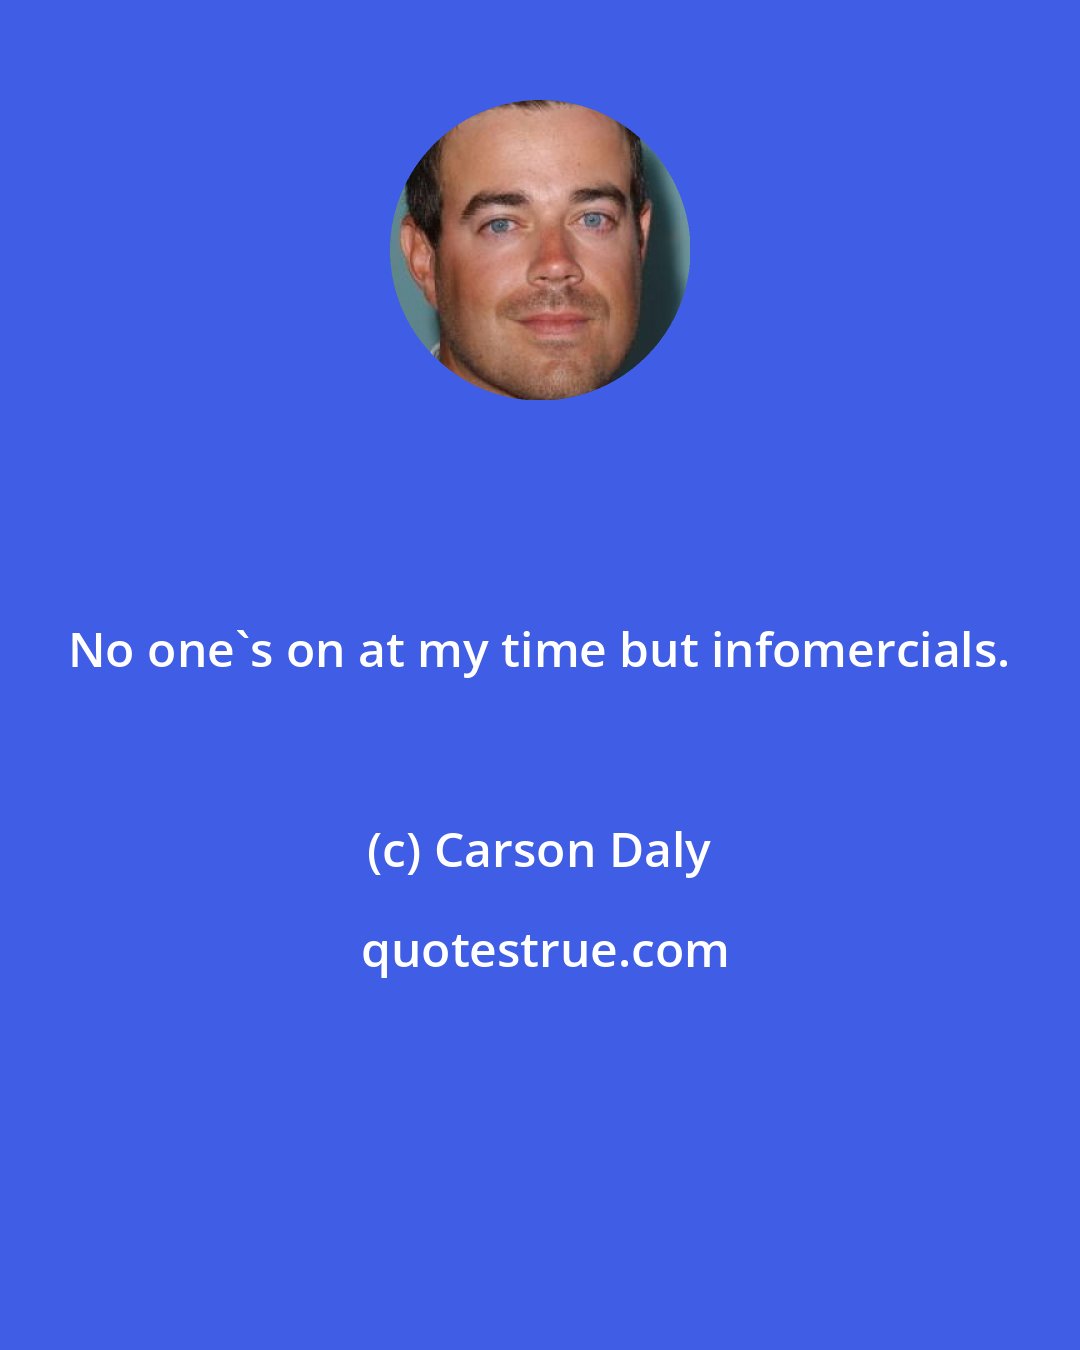 Carson Daly: No one's on at my time but infomercials.